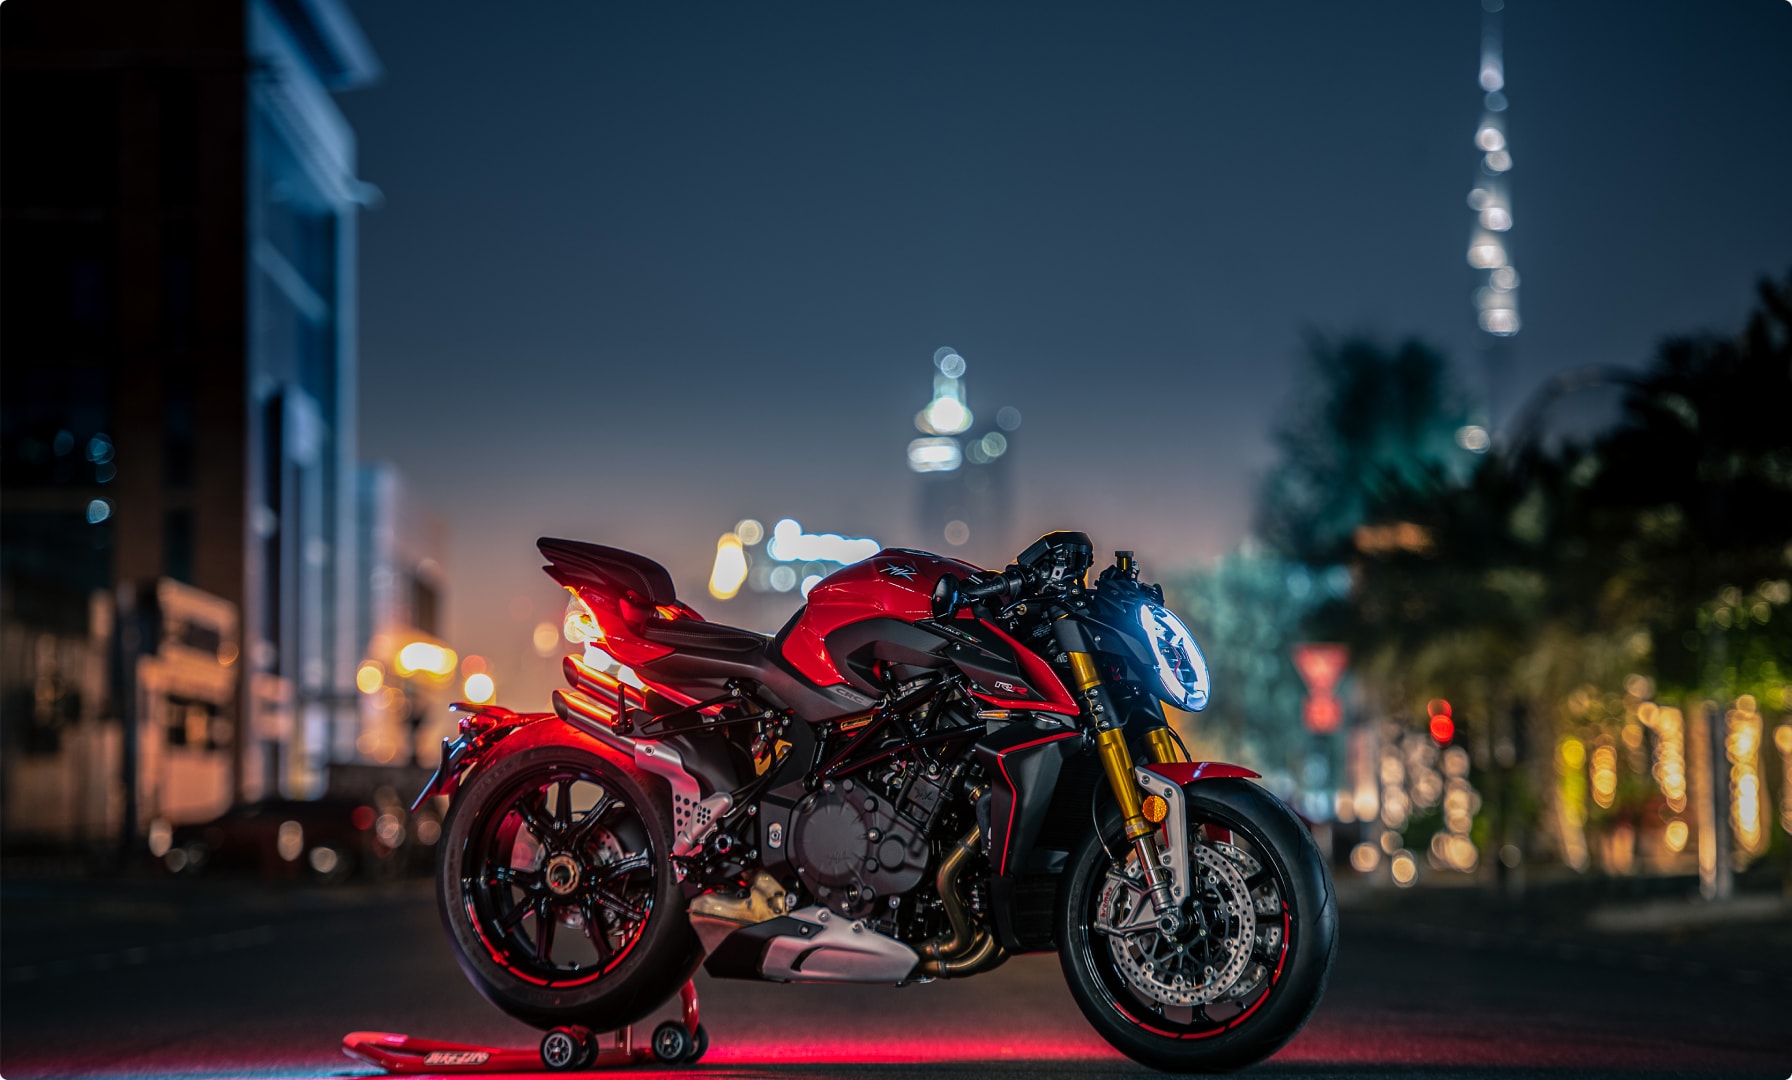 Static image of the 2022 MV Agusta Brutale 1000 RR on an empty street in the evening